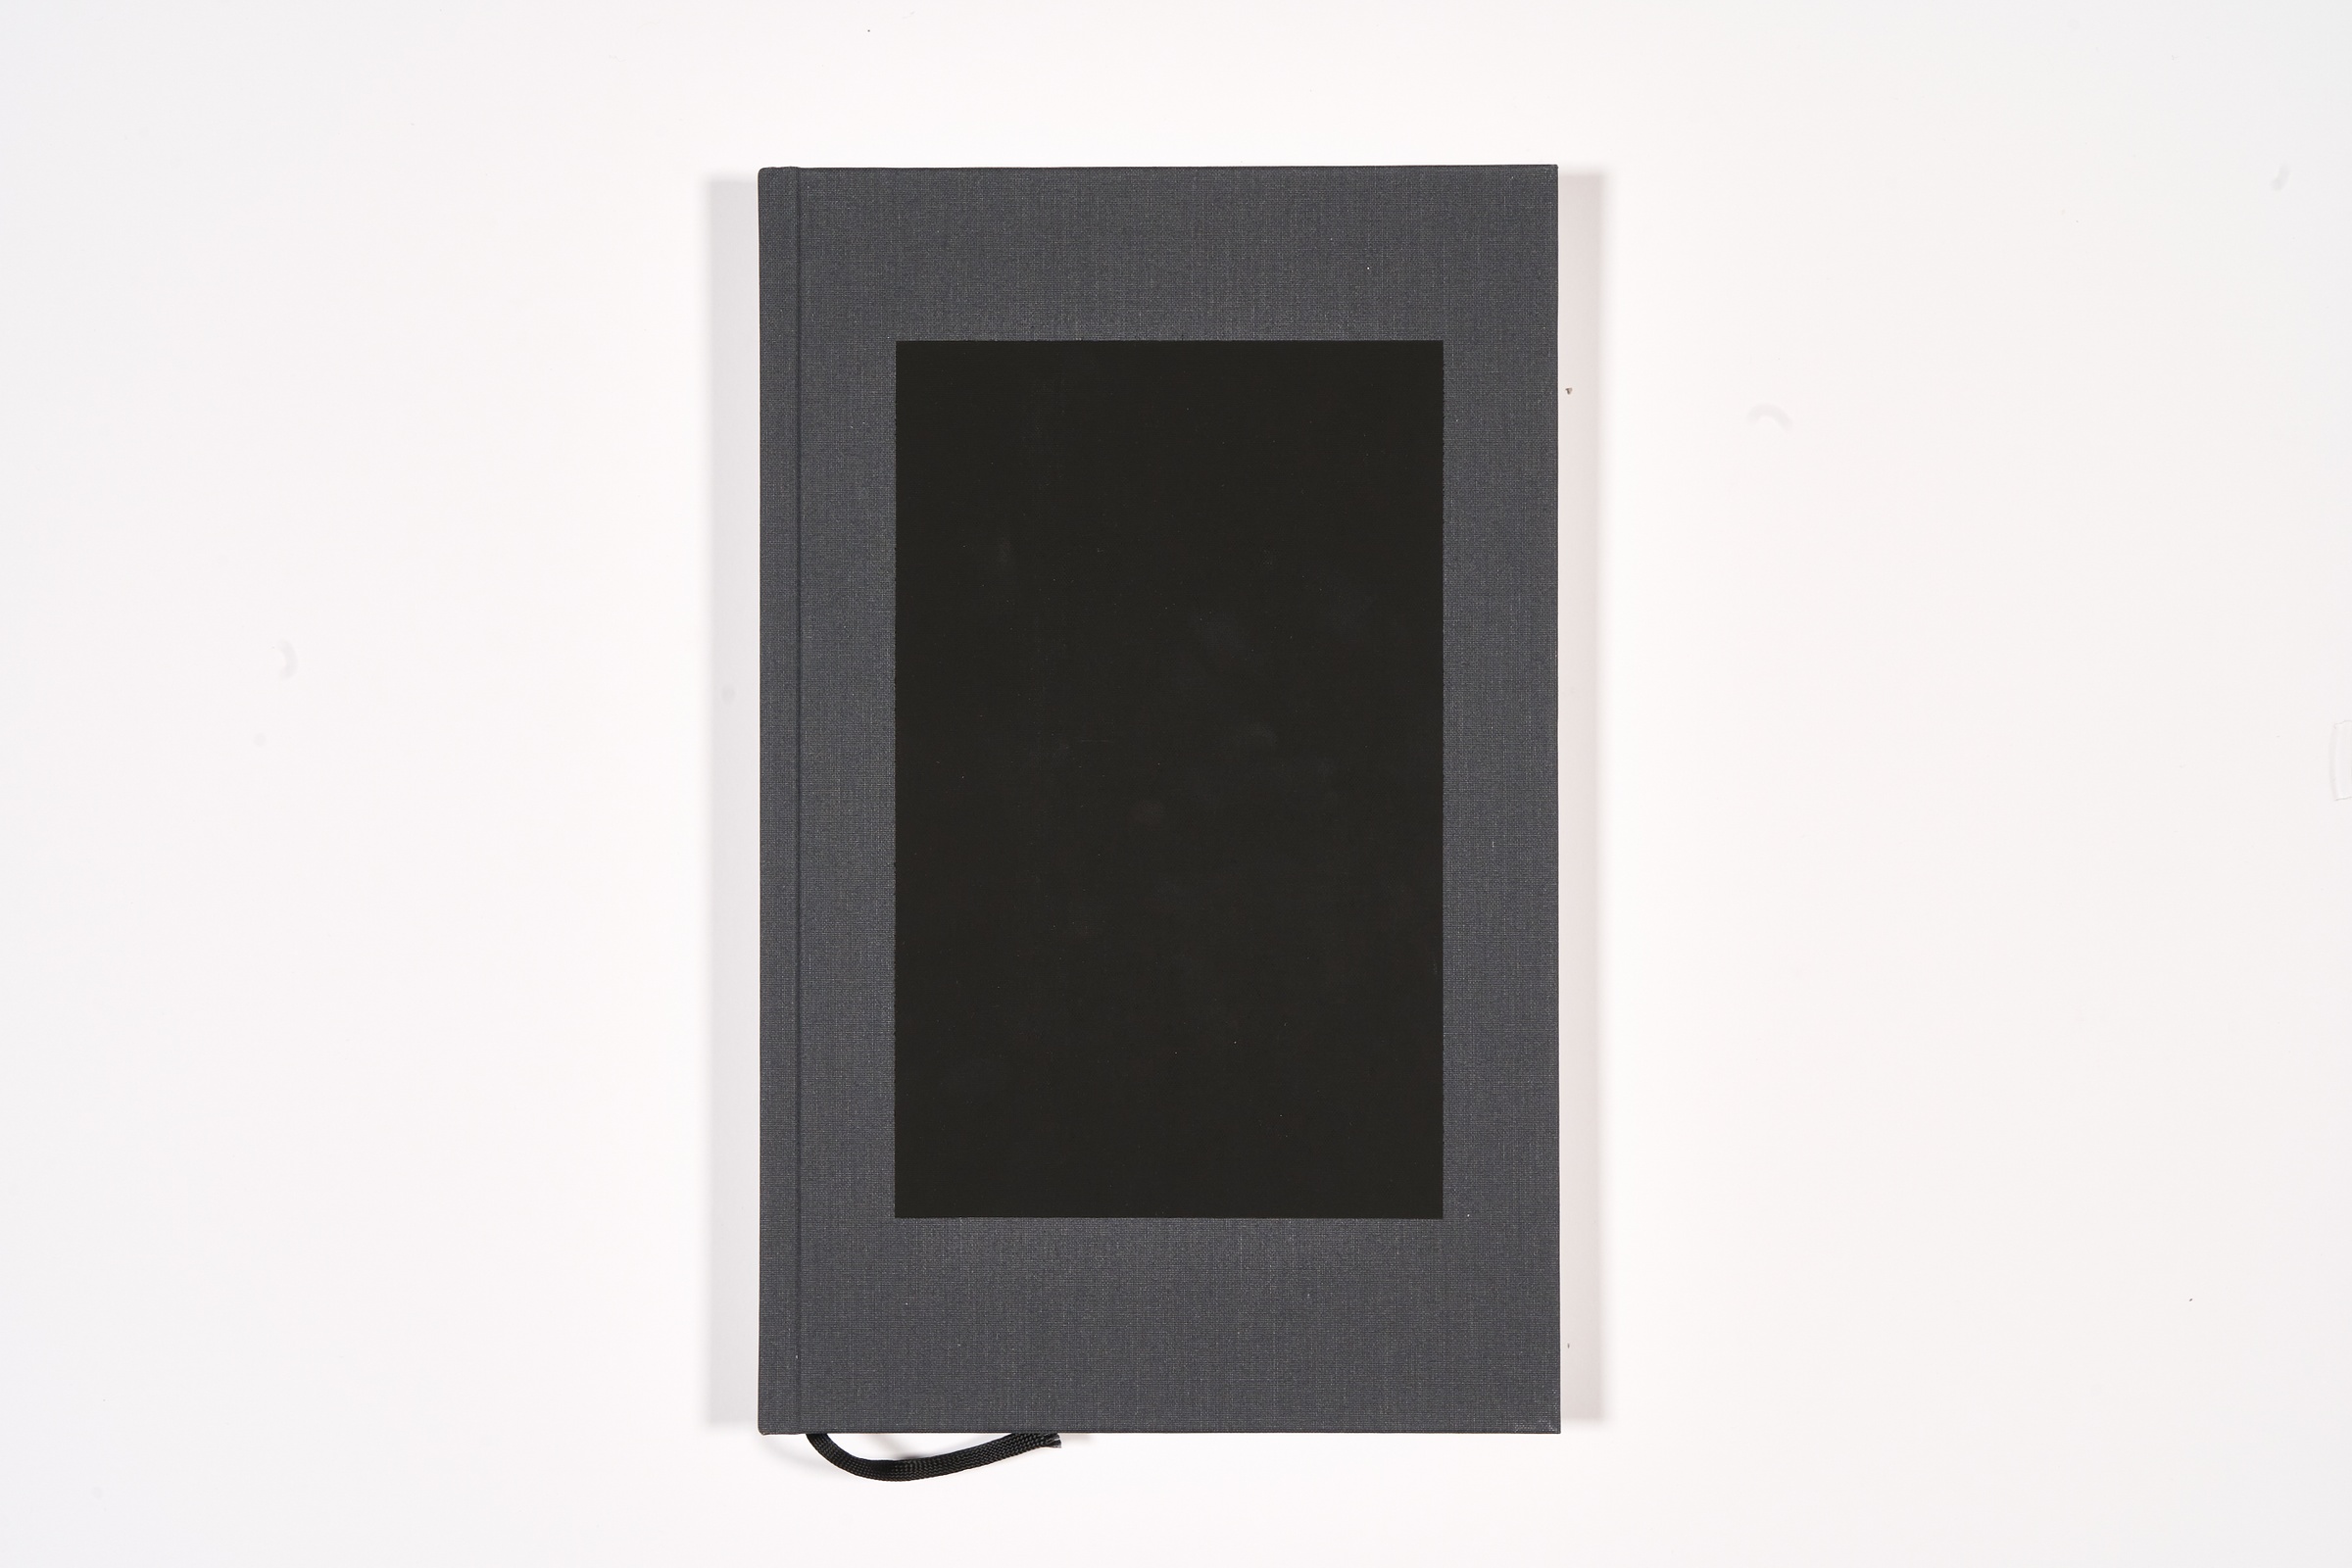 A topdown photograph of the cover of Mikhael Subotzky and Patrick Waterhouse's photo-book 'Ponte City' on a white background.
